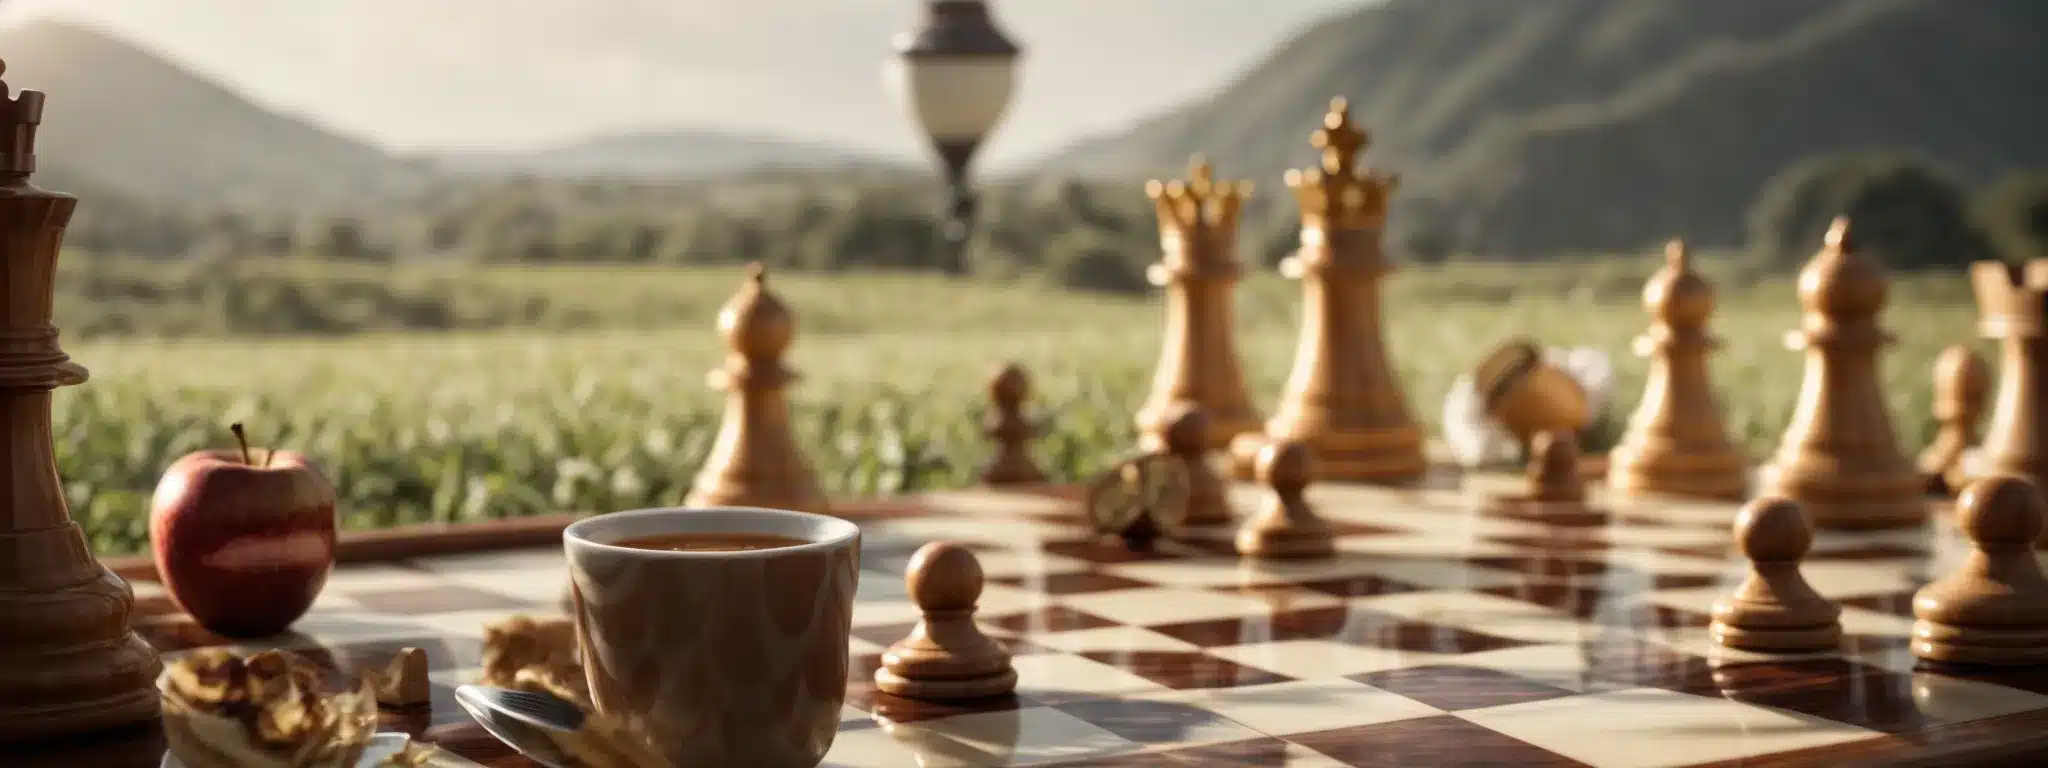 A Chessboard With Iconic Brand Symbols Like An Apple, A Coffee Cup, And A Swoosh In Place Of Traditional Pieces Marks The Field Of Strategic Gameplay.